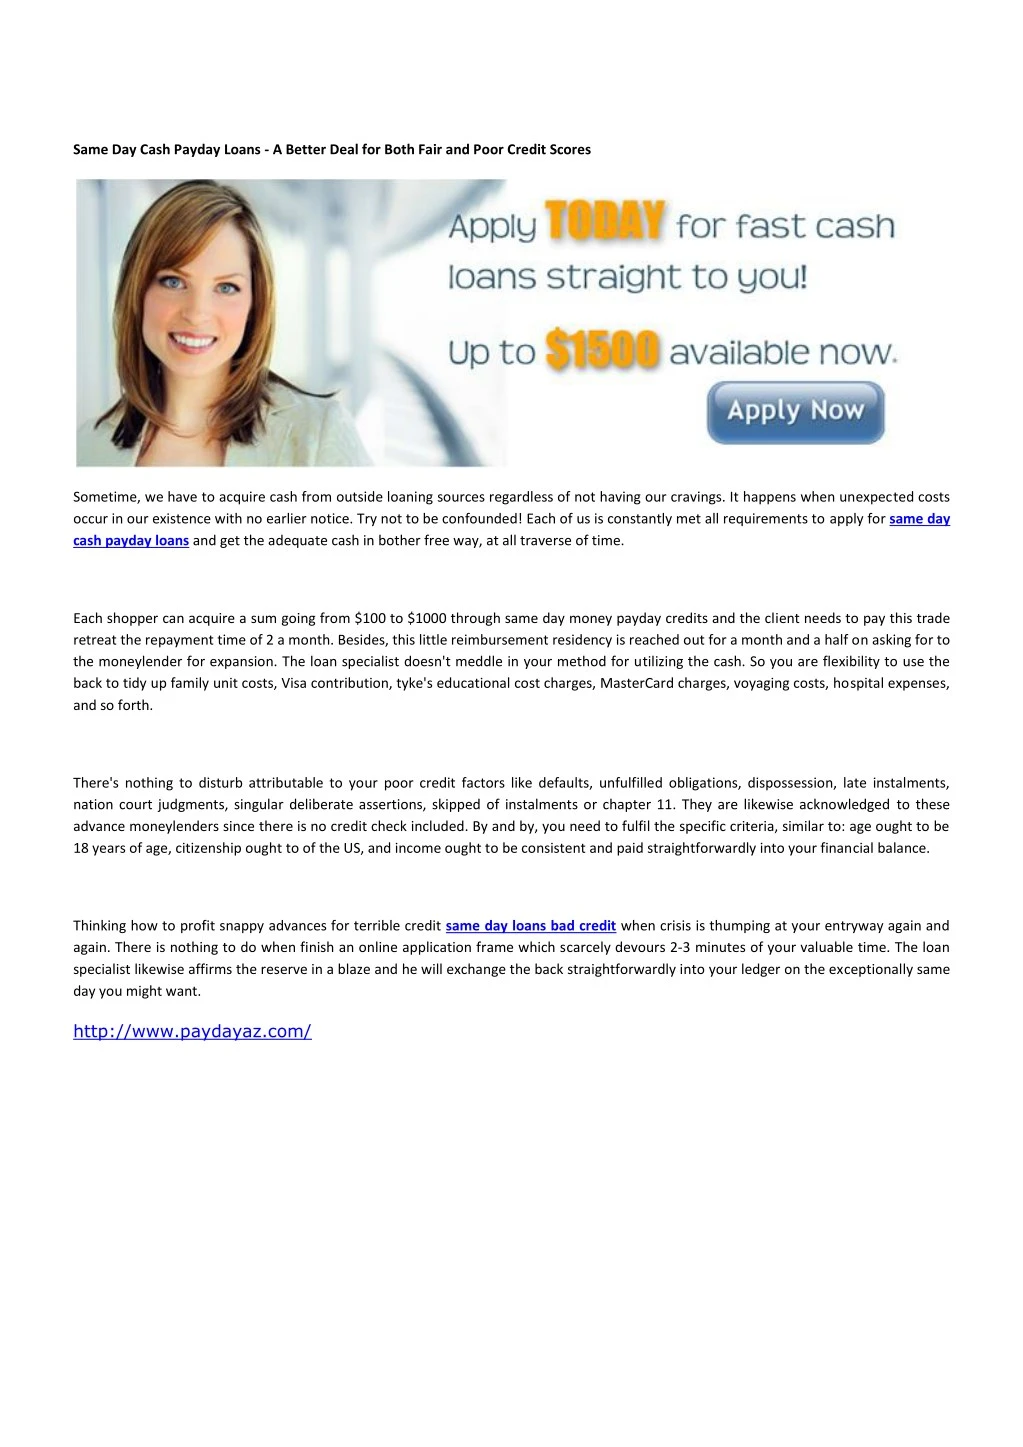 pay day advance financial loans 30 nights to settle